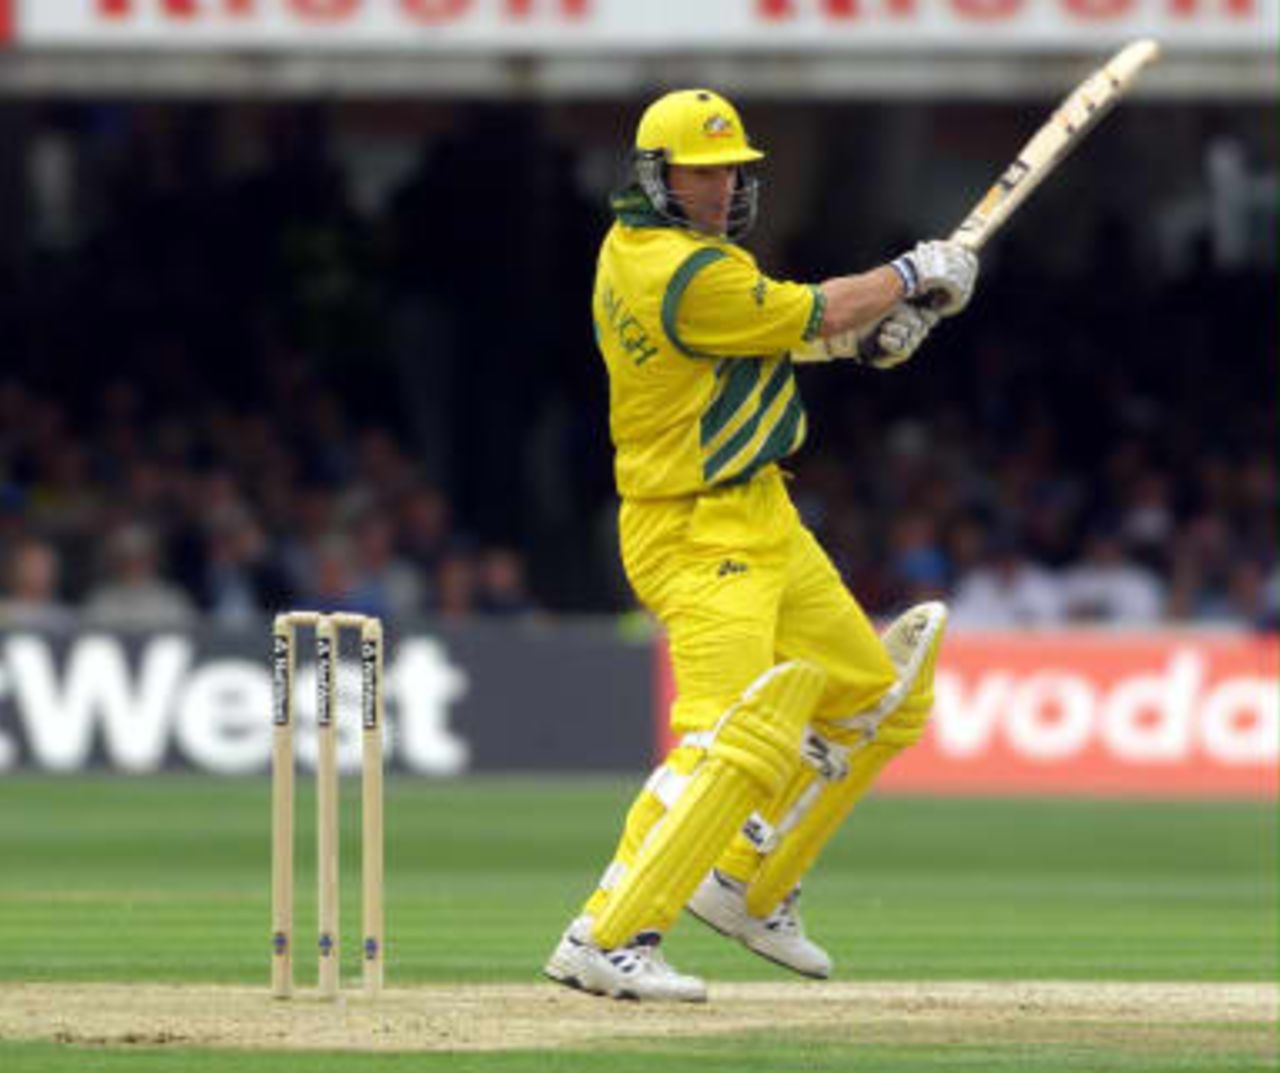 Australia's Mark Waugh hits out during the Cricket World Cup final against Pakistan at Lords in London. Australia won by 8 wickets. 20 June 1999.